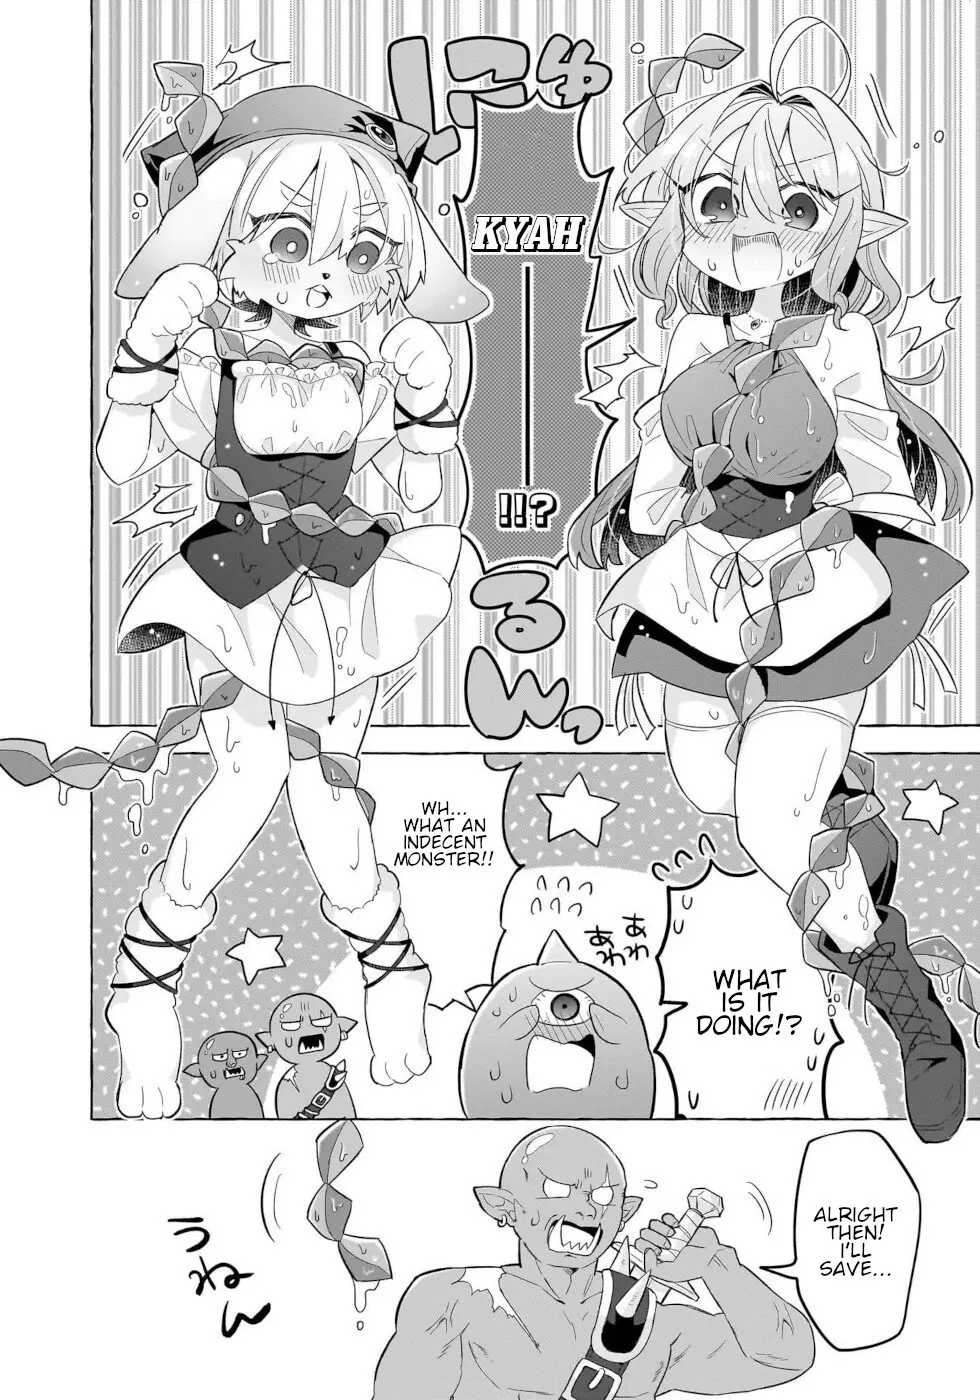 Sweets, Elf, And A High School Girl - 3 page 4-8de2fad8